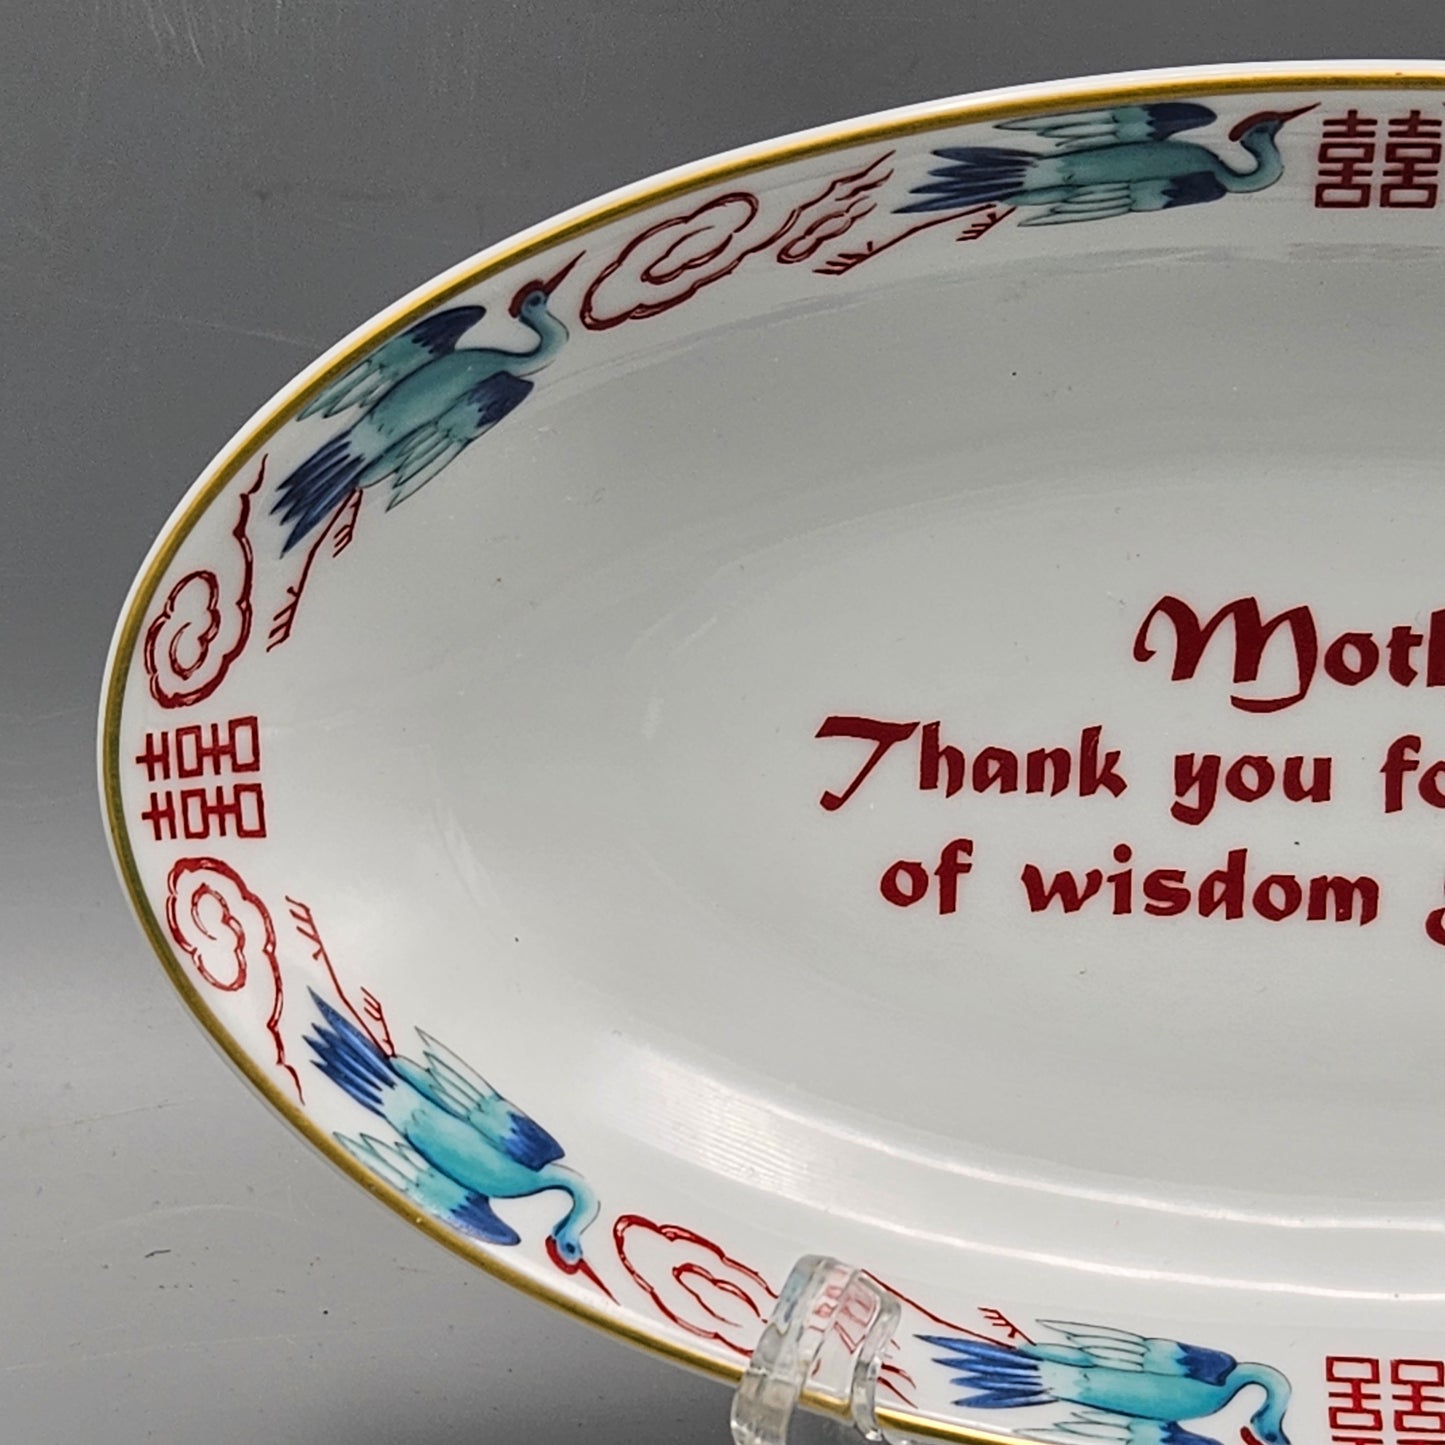 Mottahedeh Porcelain "Mother Thank for For the gift of wisdom and love." Oval Plate